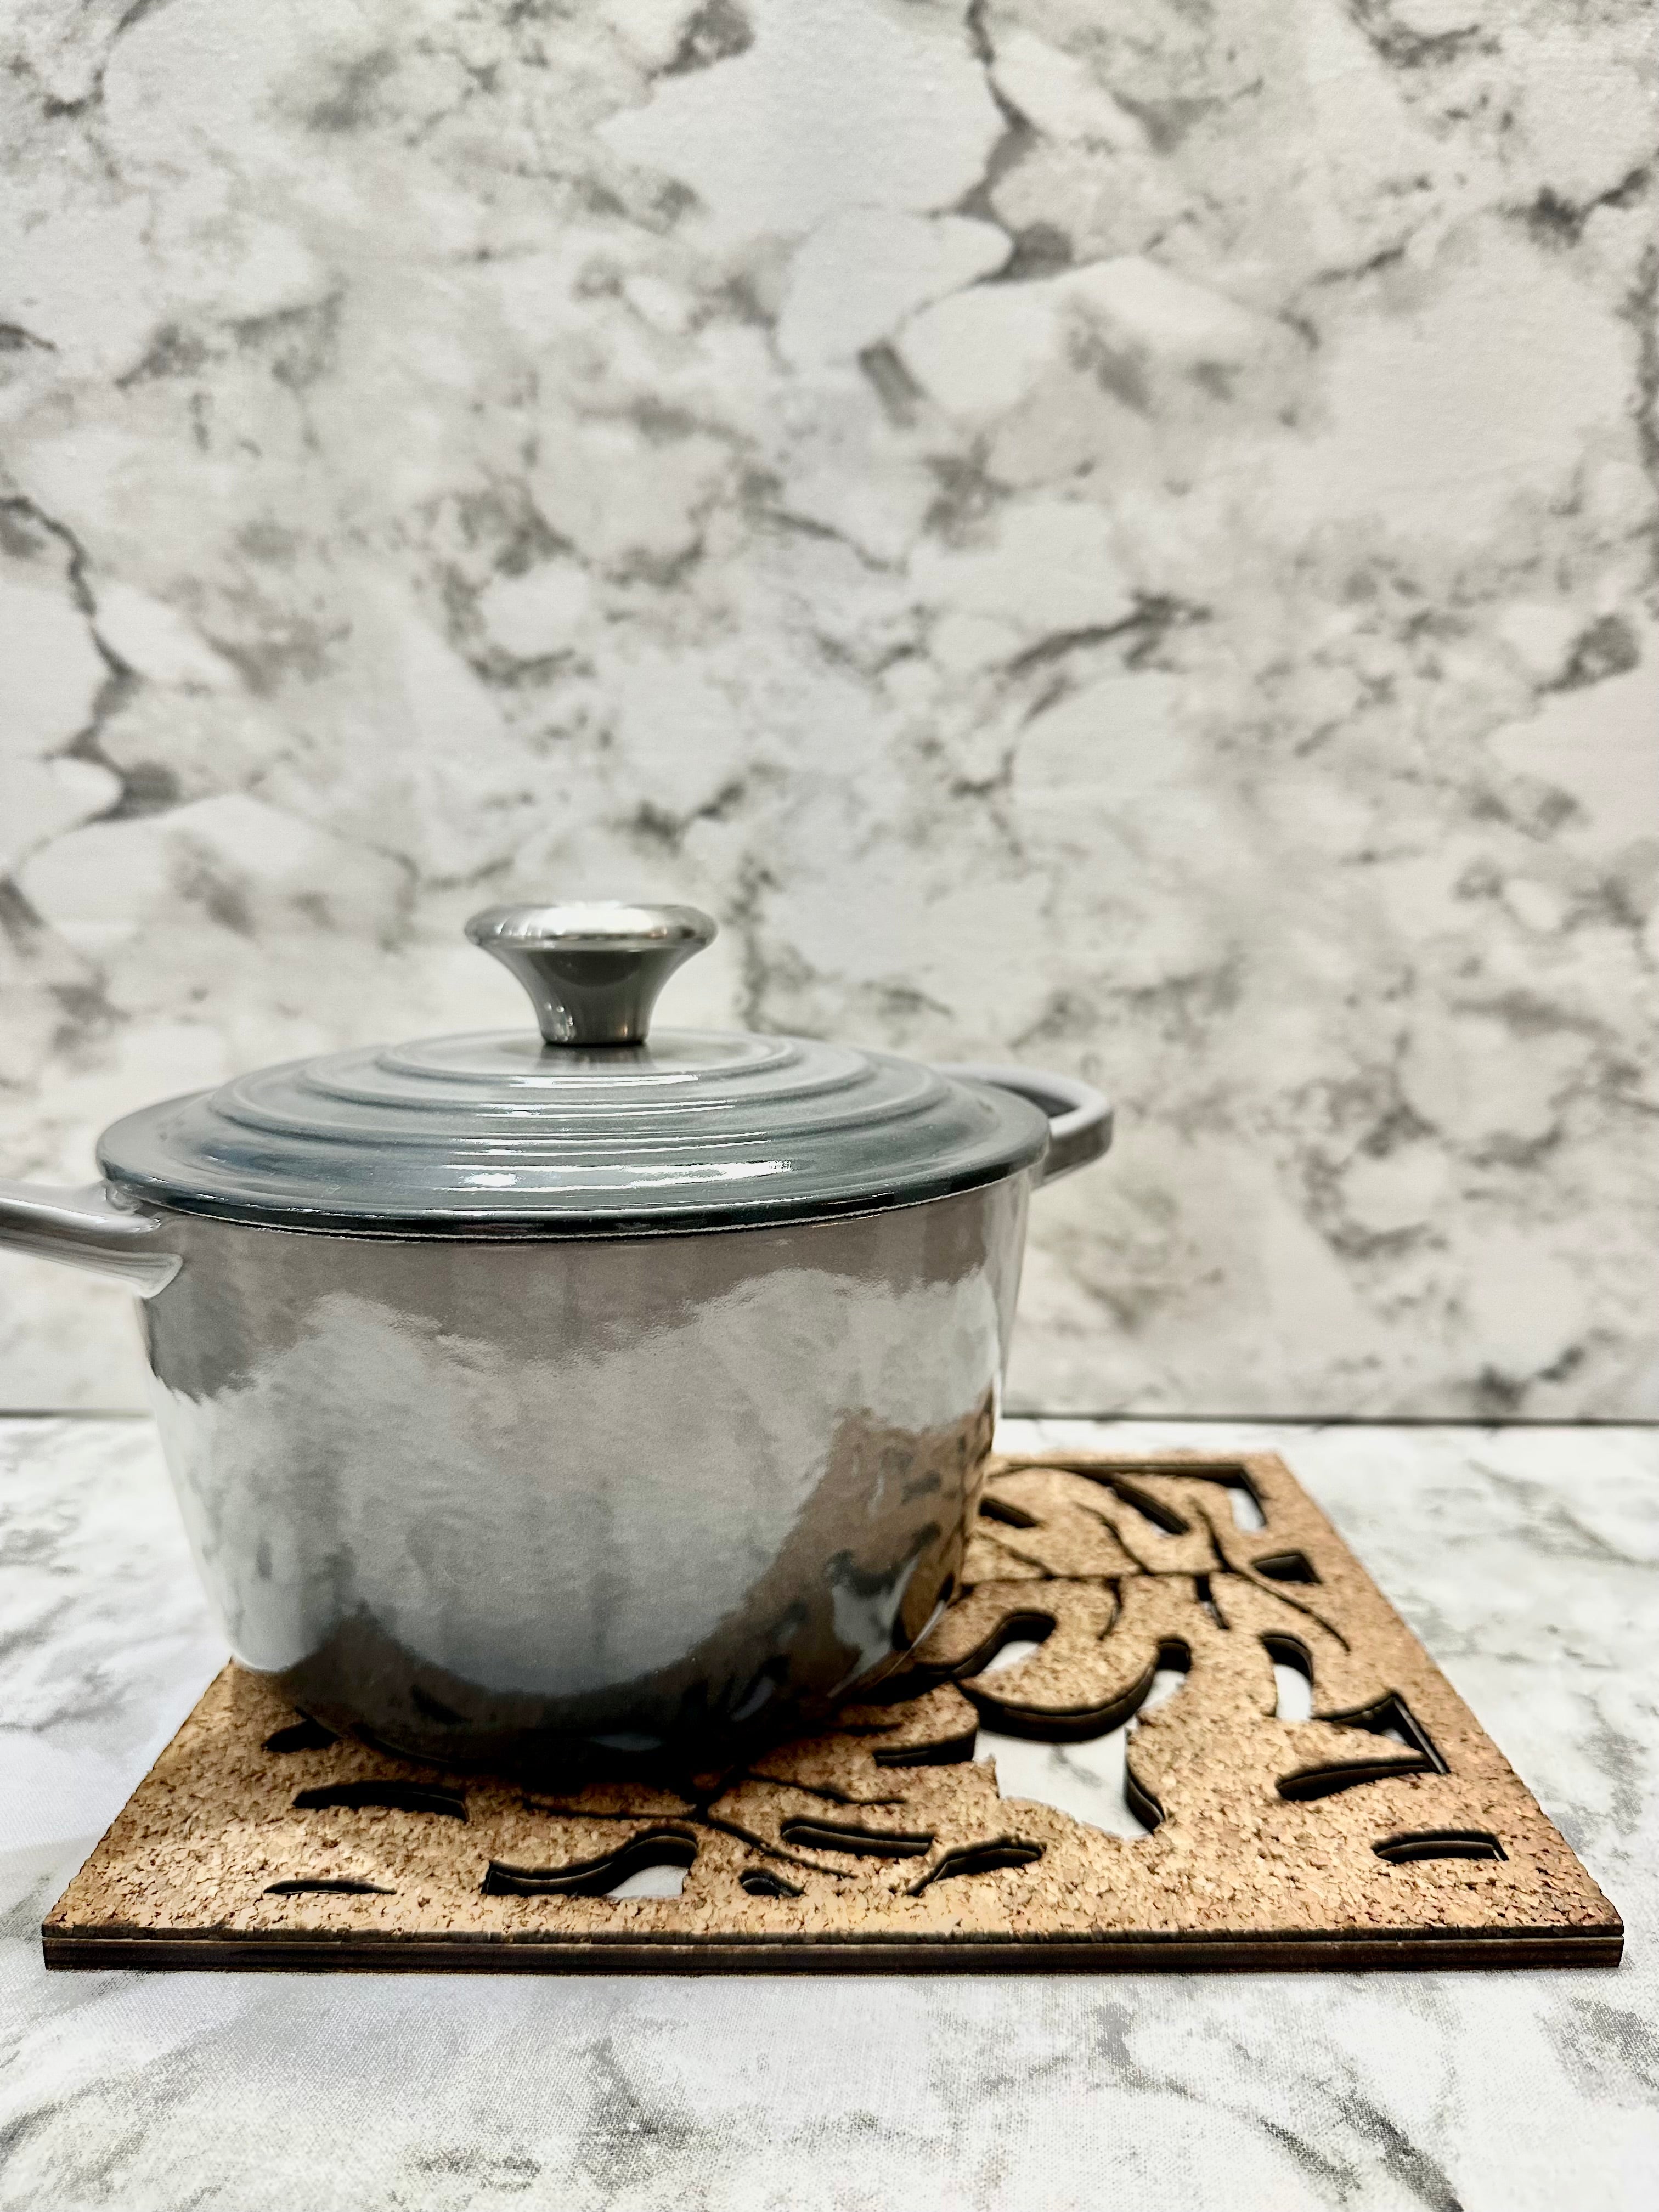 Monstera Leaf Cork Trivet, shown here with a small grey saucepan.